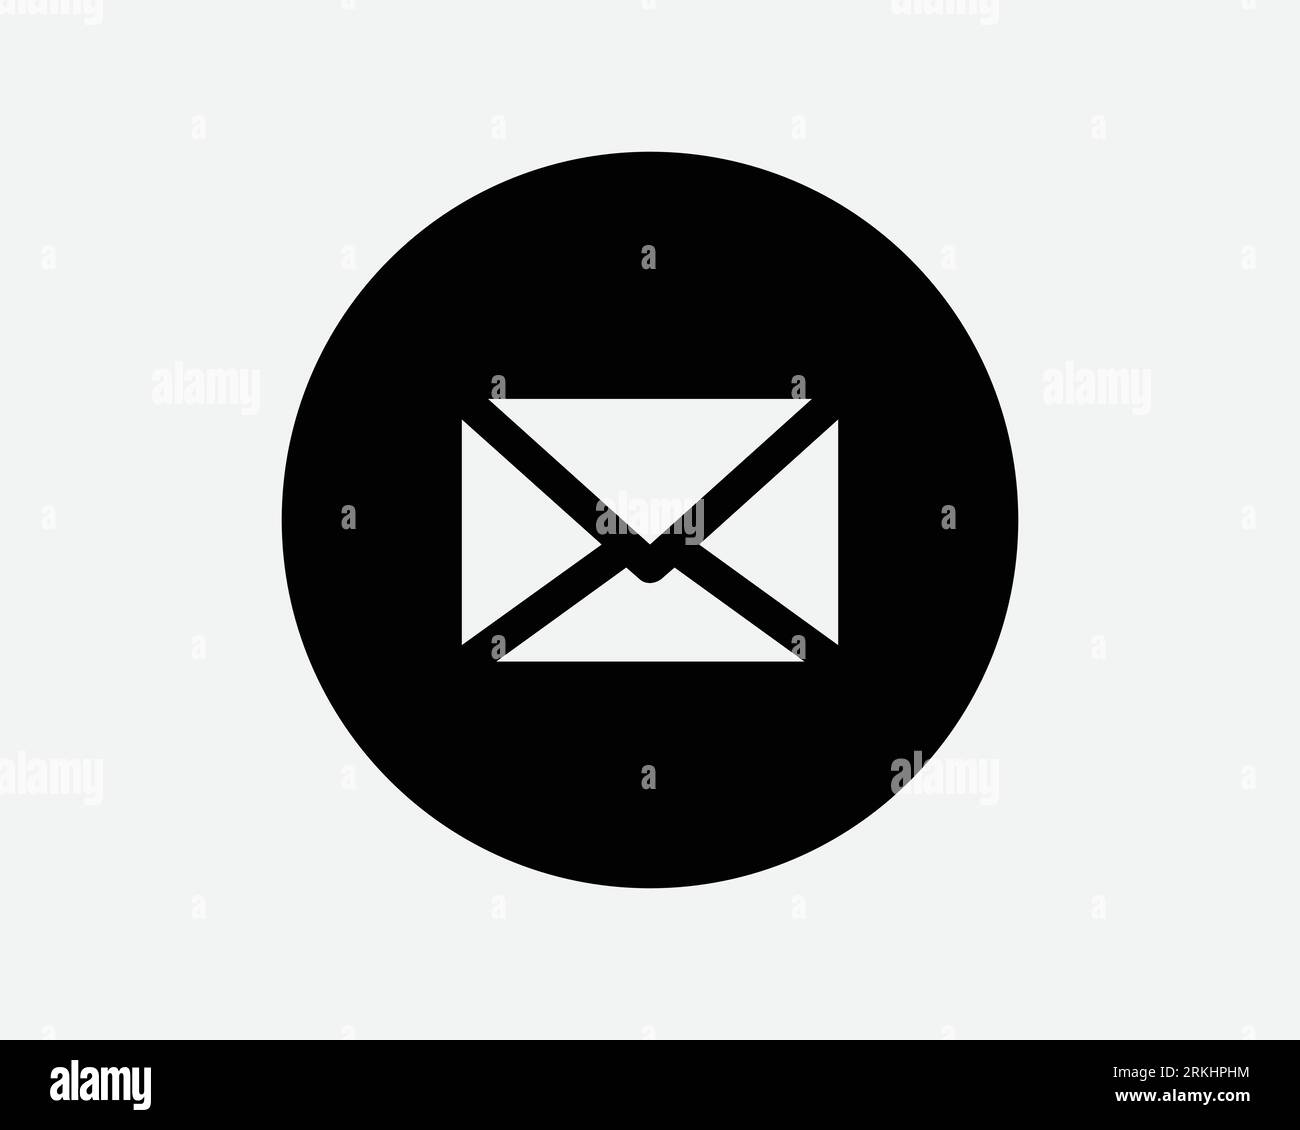 Envelope Round Icon Mail Email Letter Message Circle Circular Button App Post Postal Newsletter Black White Shape Vector Clipart Artwork Sign Symbol Stock Vector